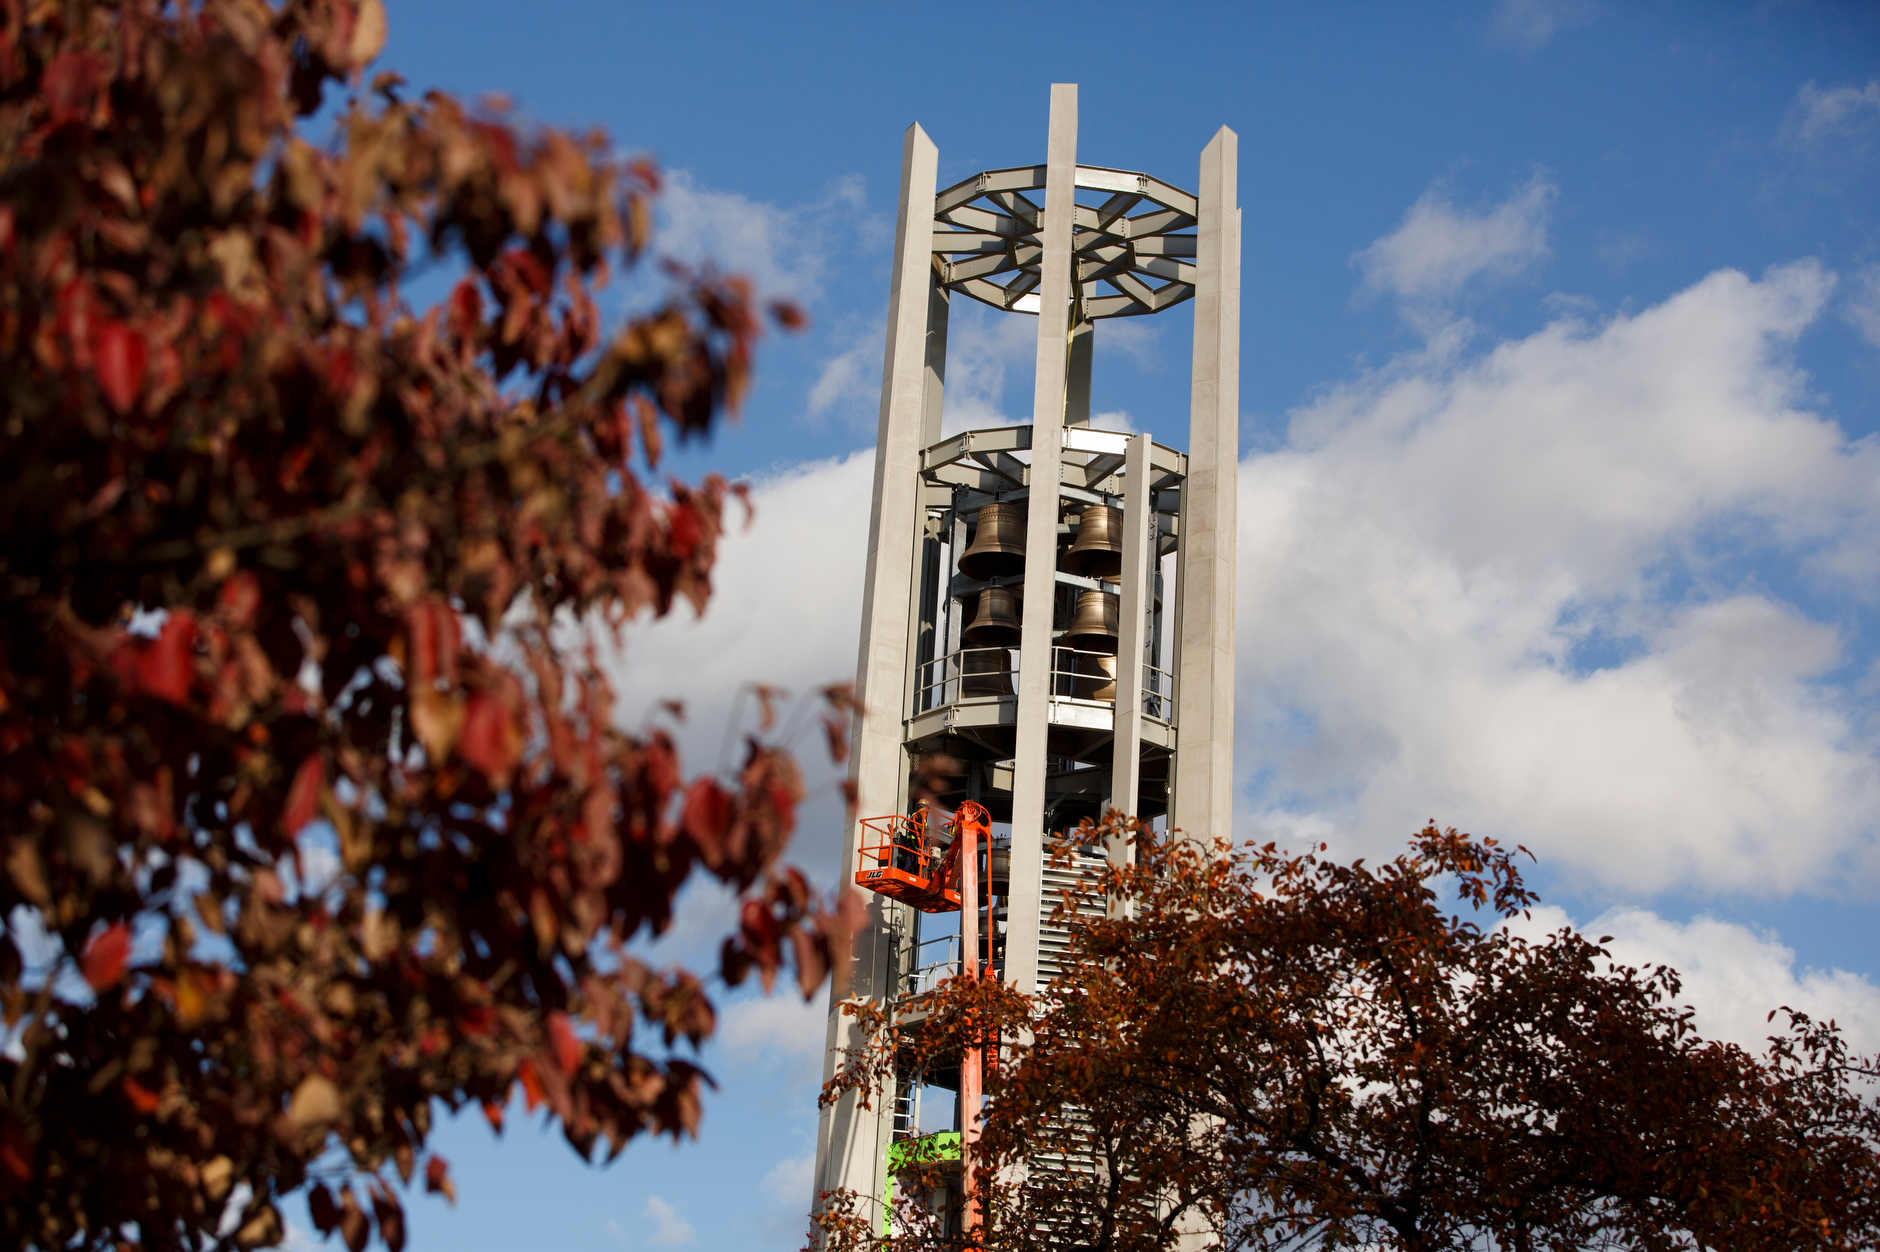 Work continues on the Arthur R. Metz Bicentennial Grand Carillon in the Arboretum at IU Bloomington on Tuesday, Oct. 22, 2019. (James Brosher/Indiana University)